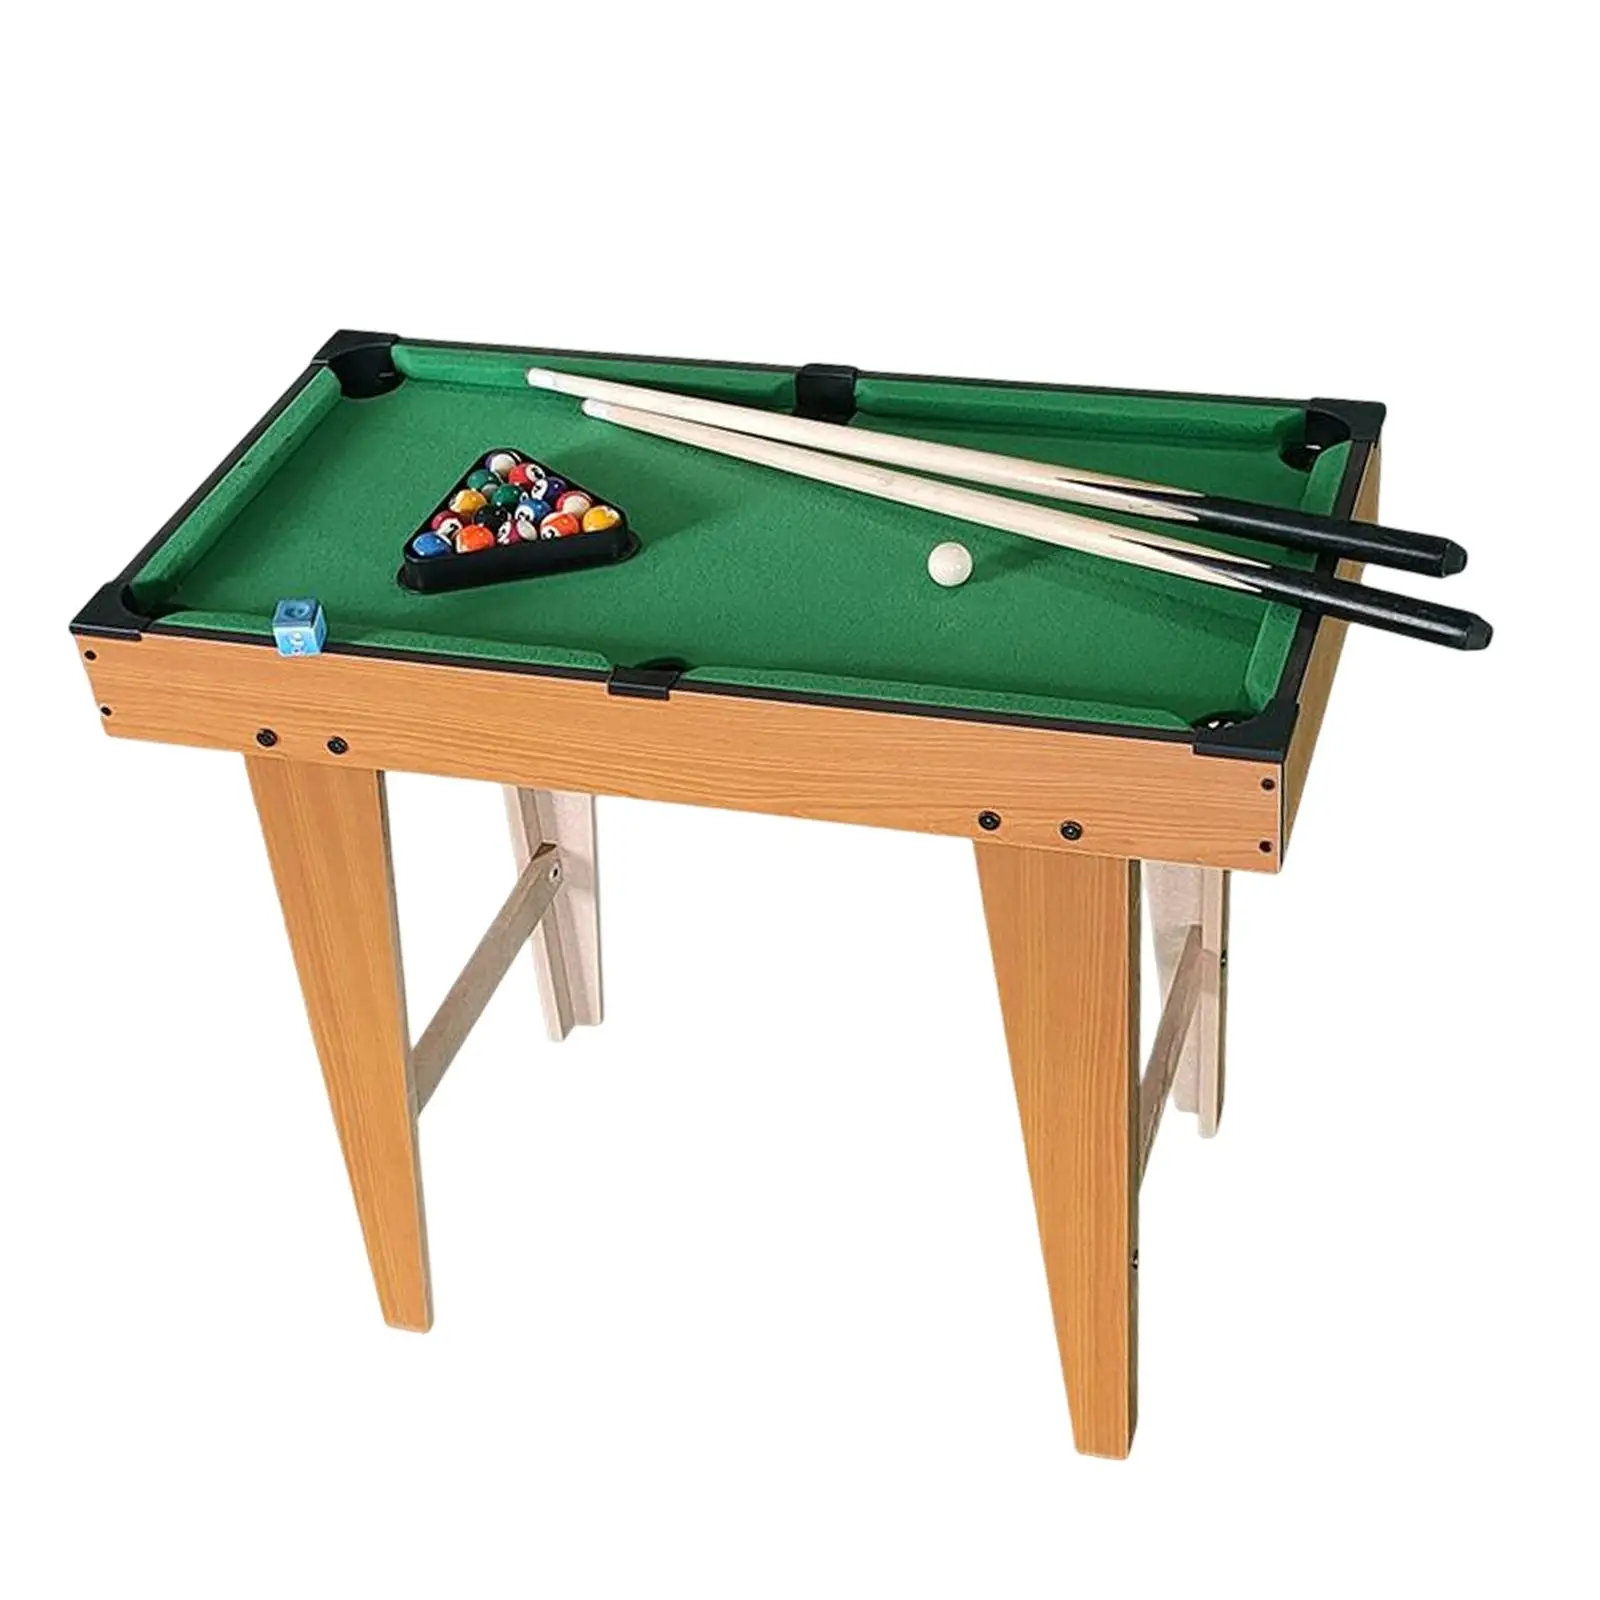 Portable Pool Table Set 23inch Height Tabletop Billiards for